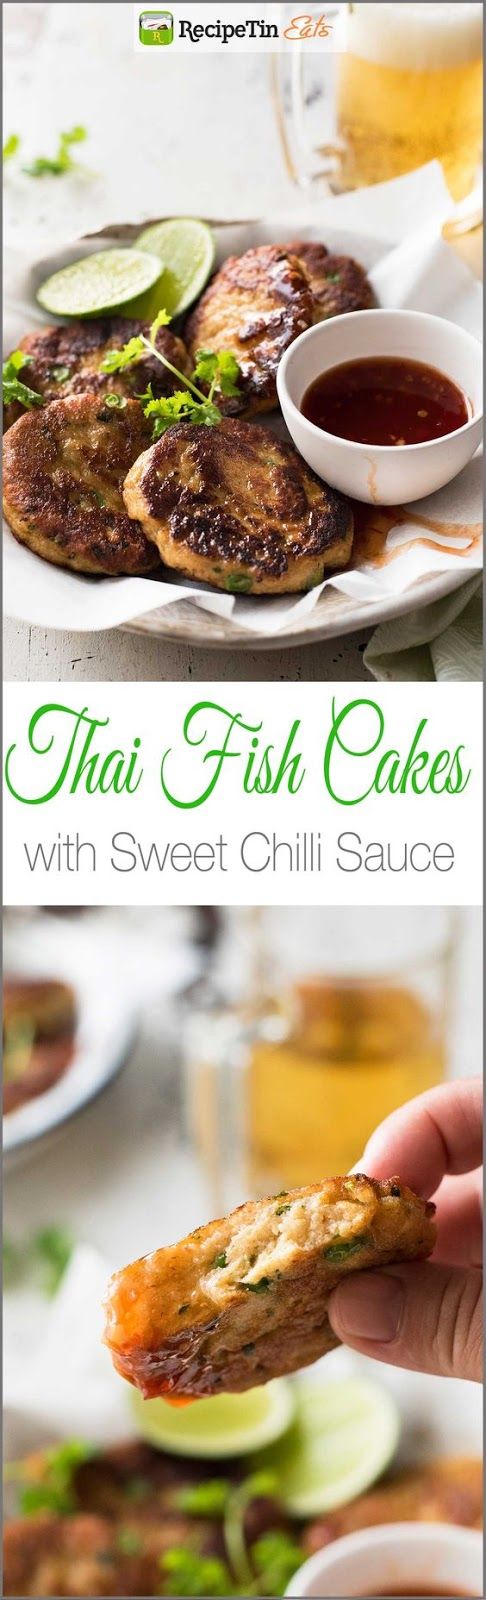 This is an authentic restaurant recipe for Thai Fish Cakes. They should be firm but bouncy, almost a spongey texture, well seasoned, golden ...